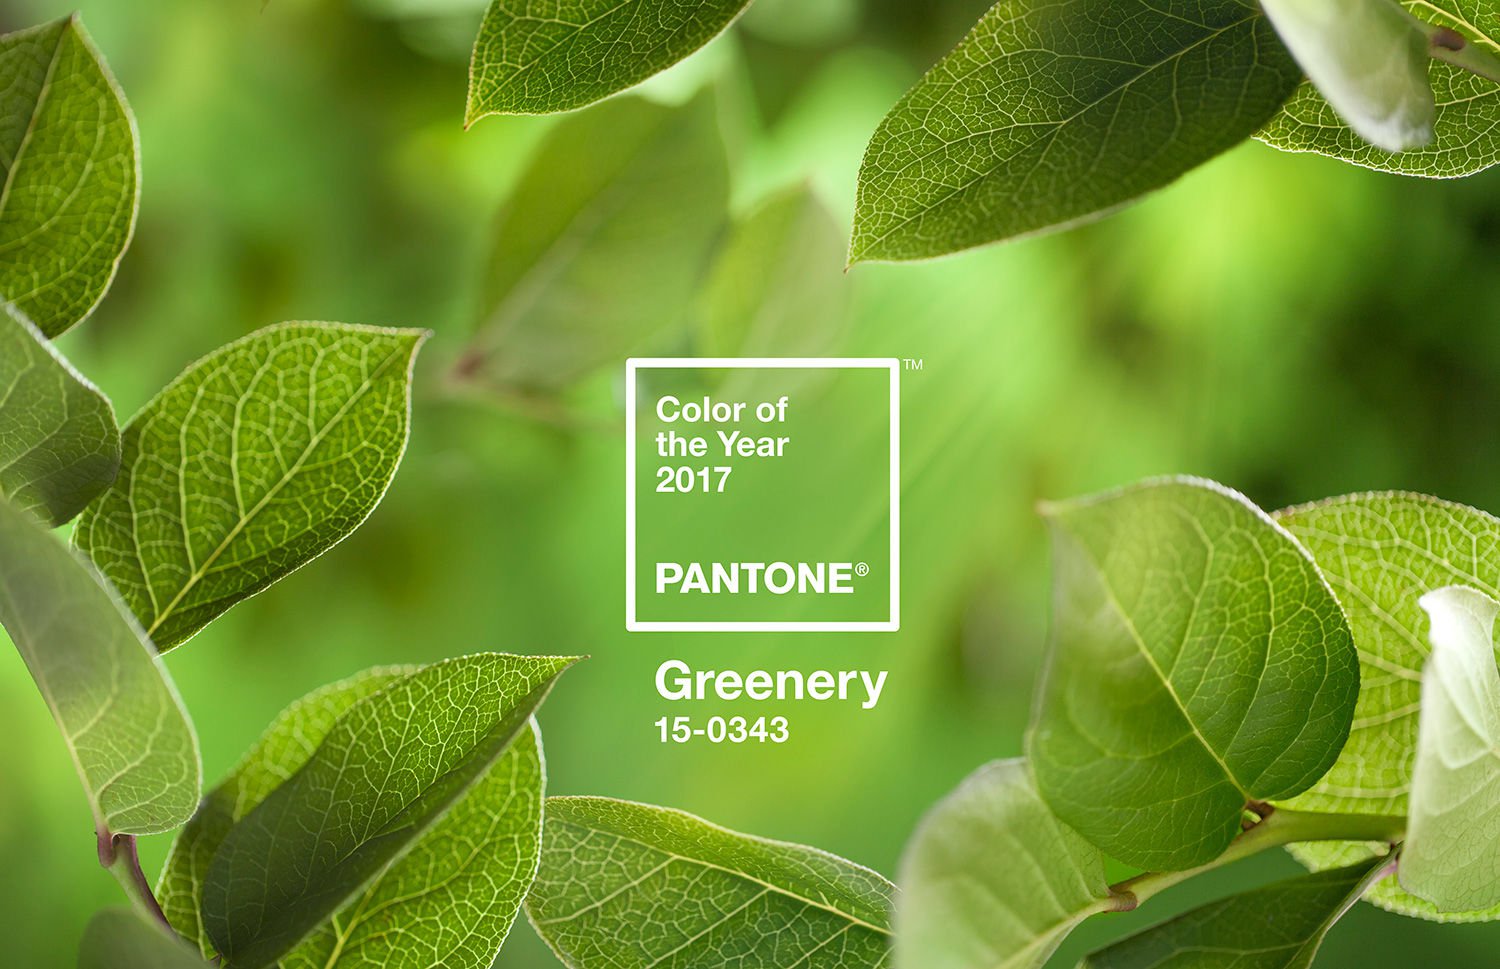 A sneak preview of Pantone’s Colour of the Year 2017